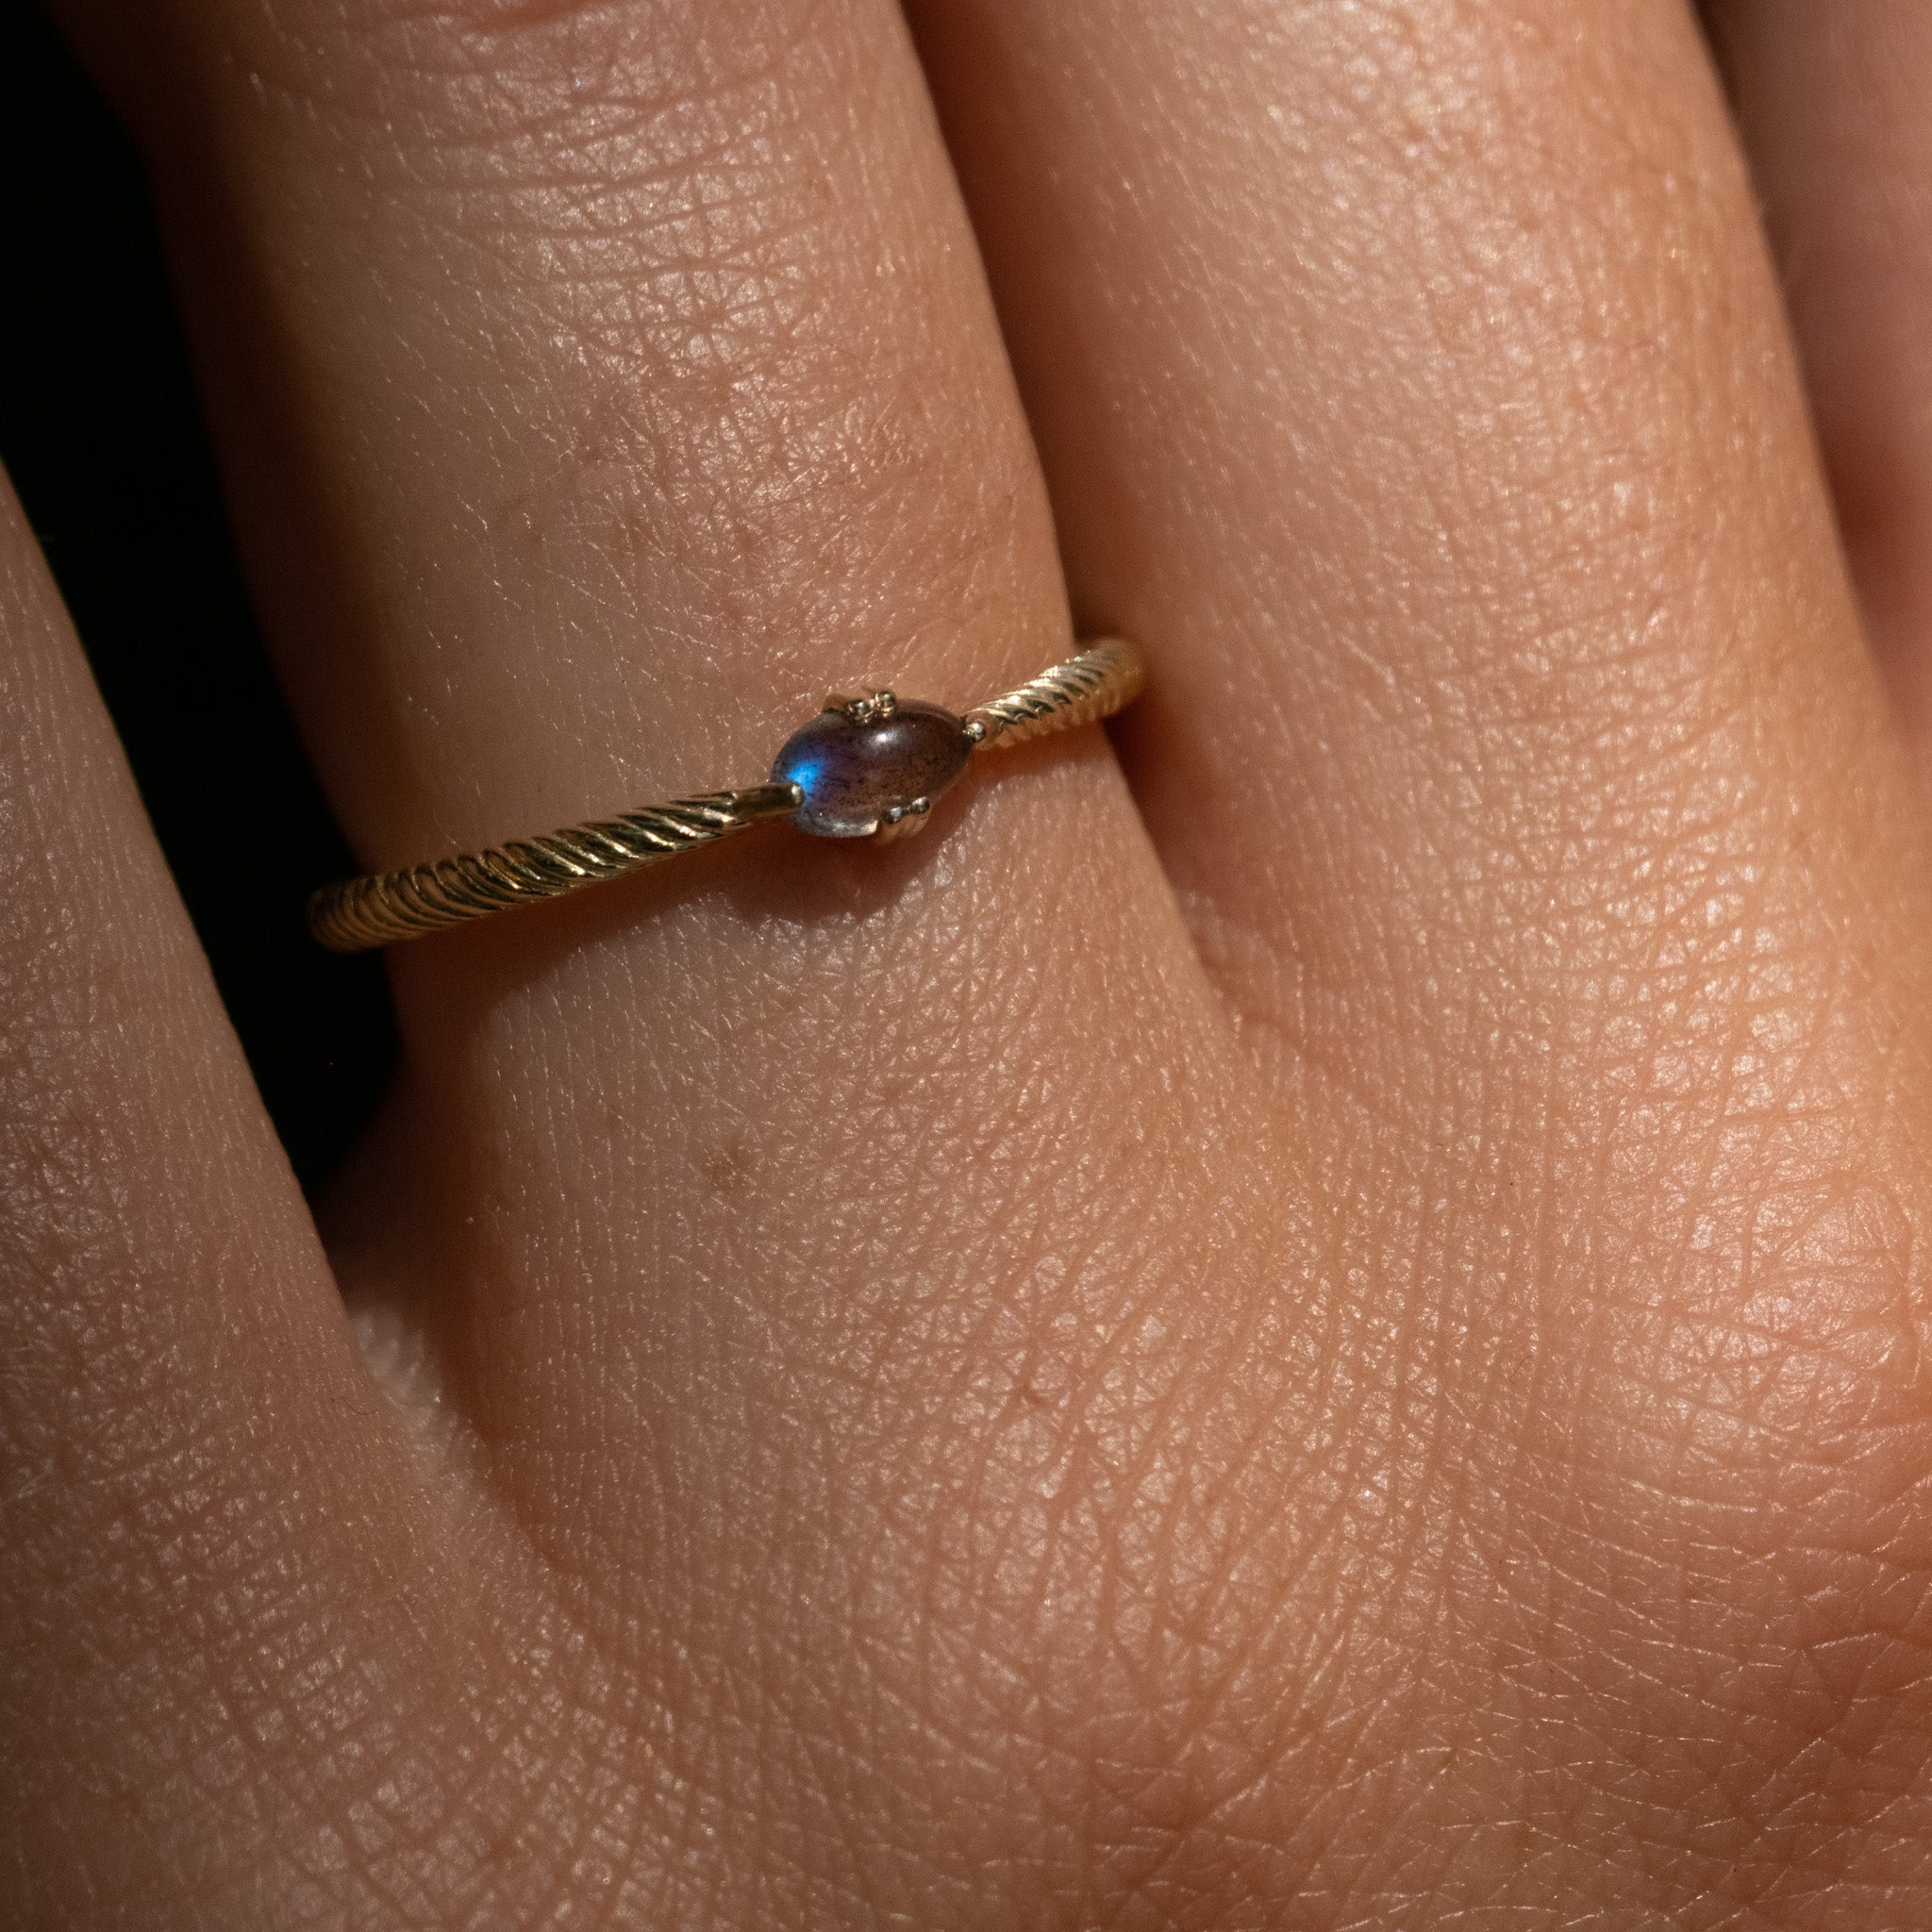 A close up of a person's hand with an Aiden Jae Sunset Ring on it.